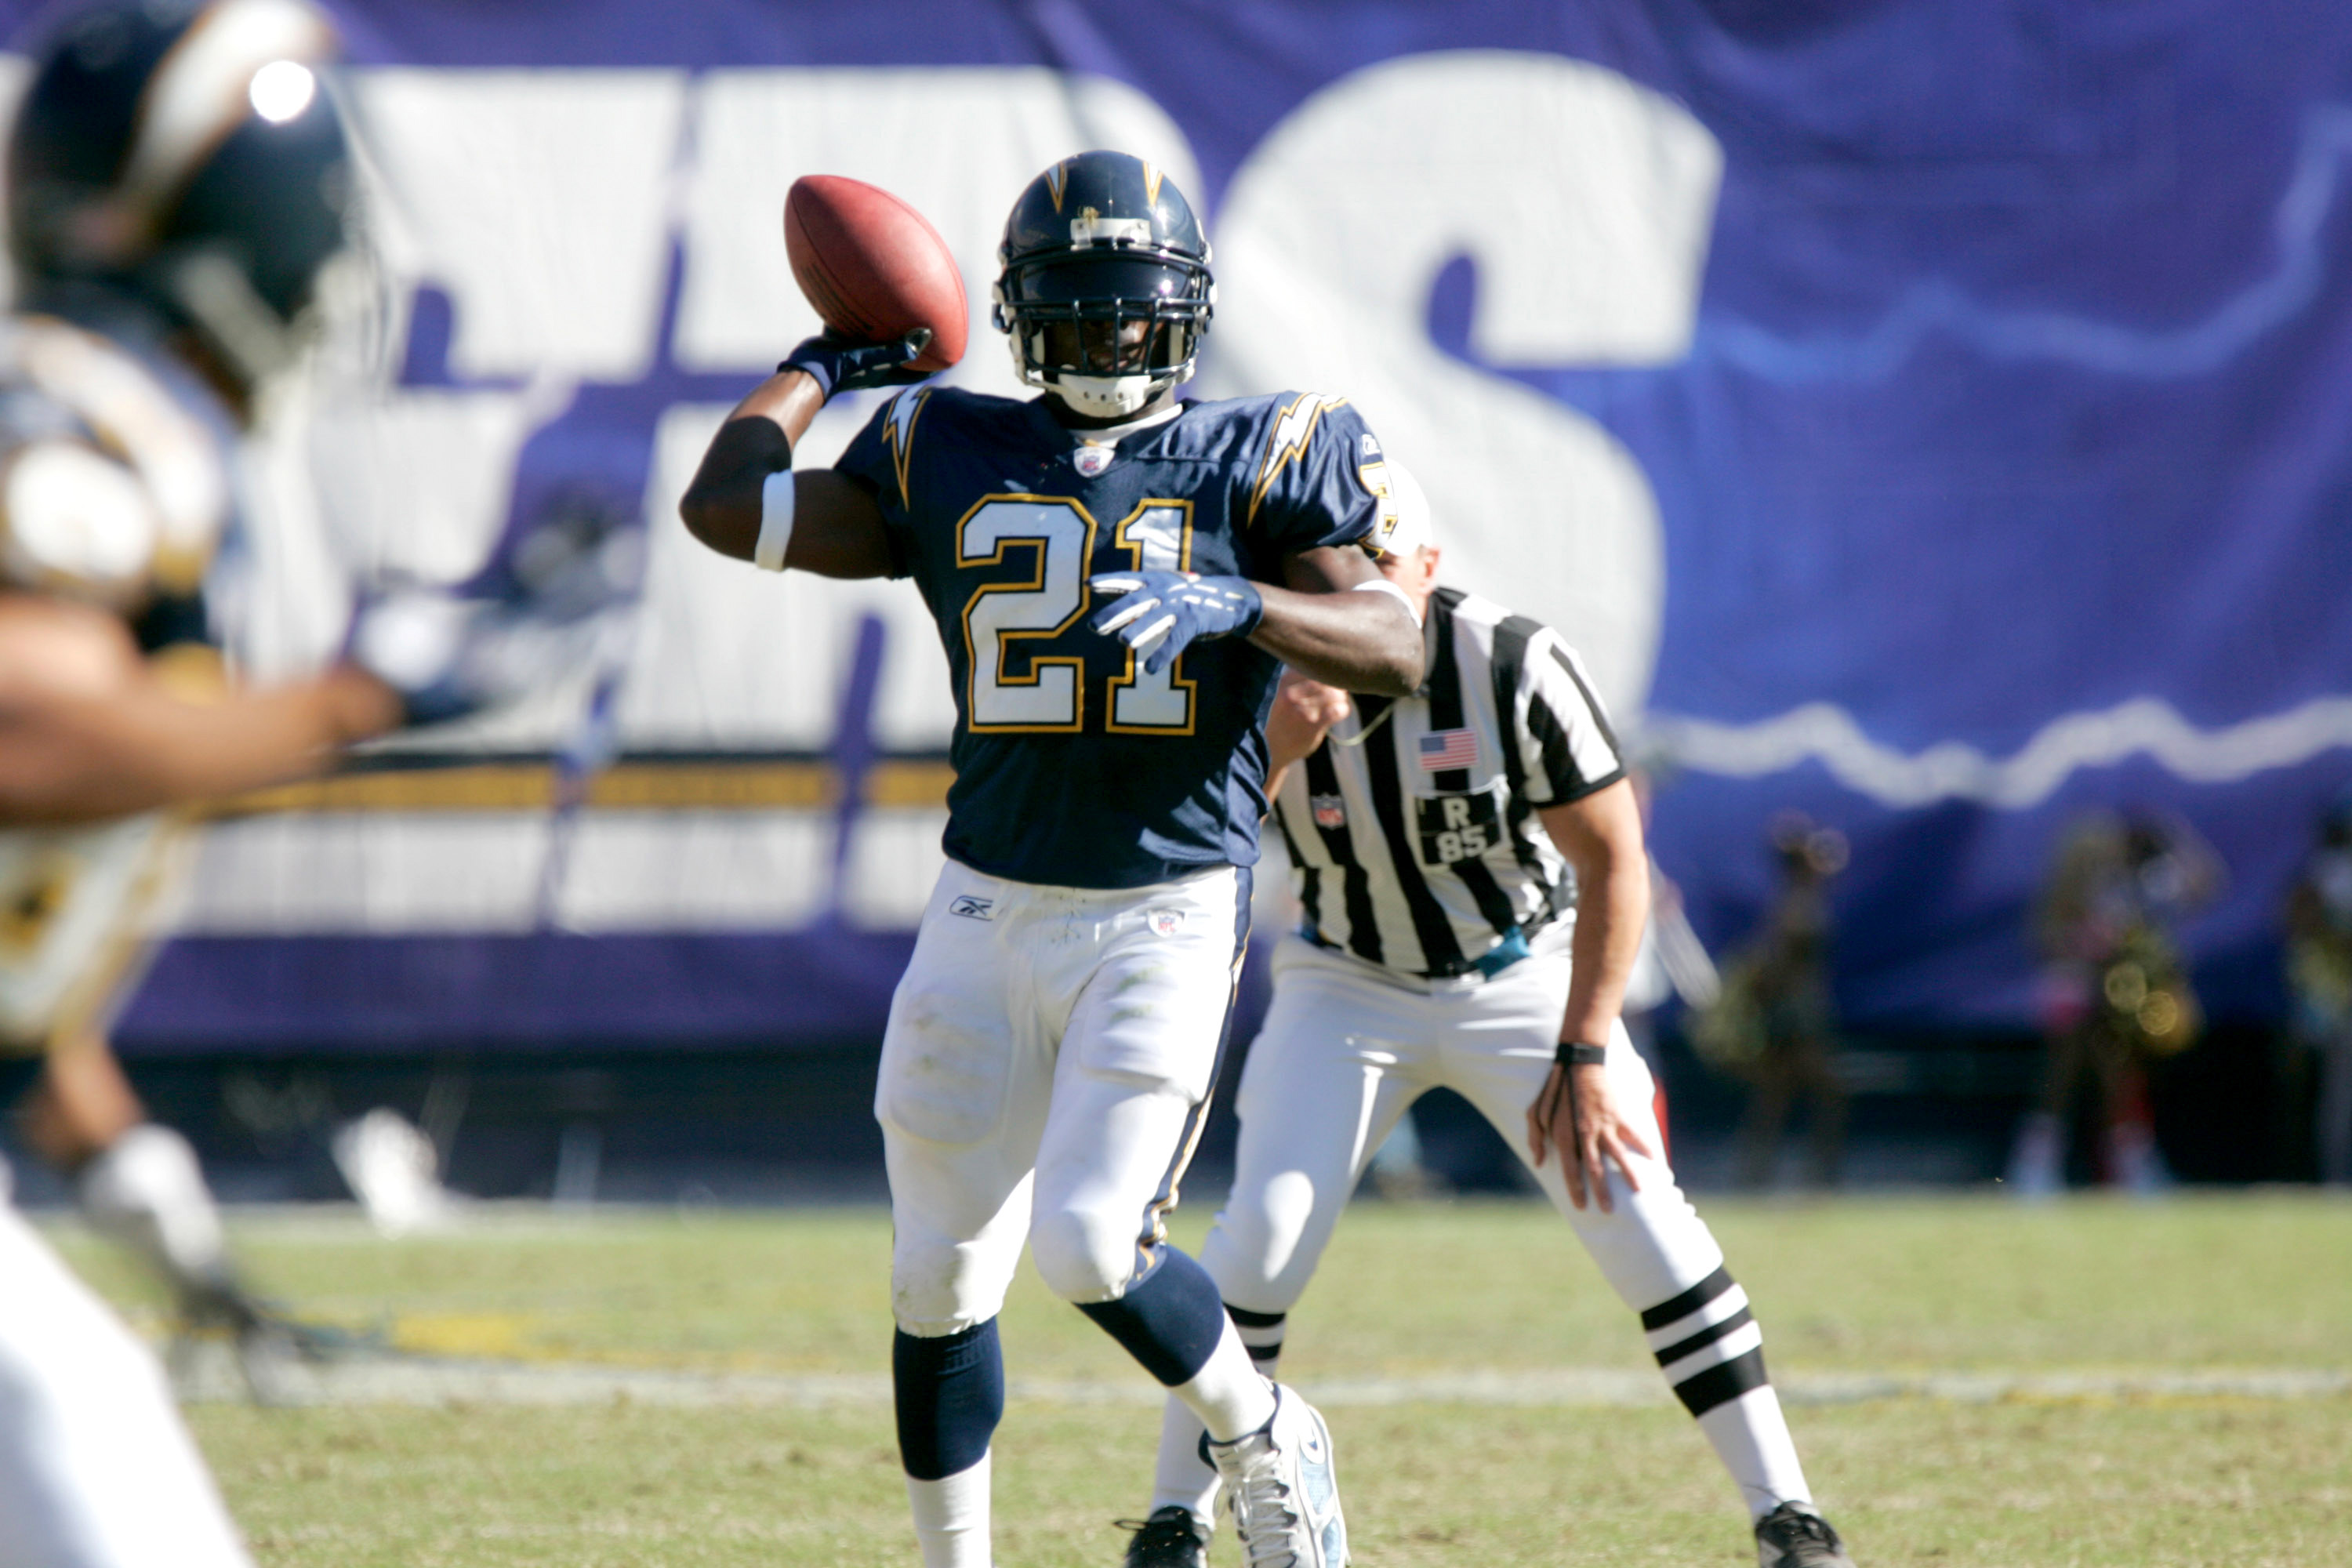 LaDainian Tomlinson throwing a pass during a Chargers game